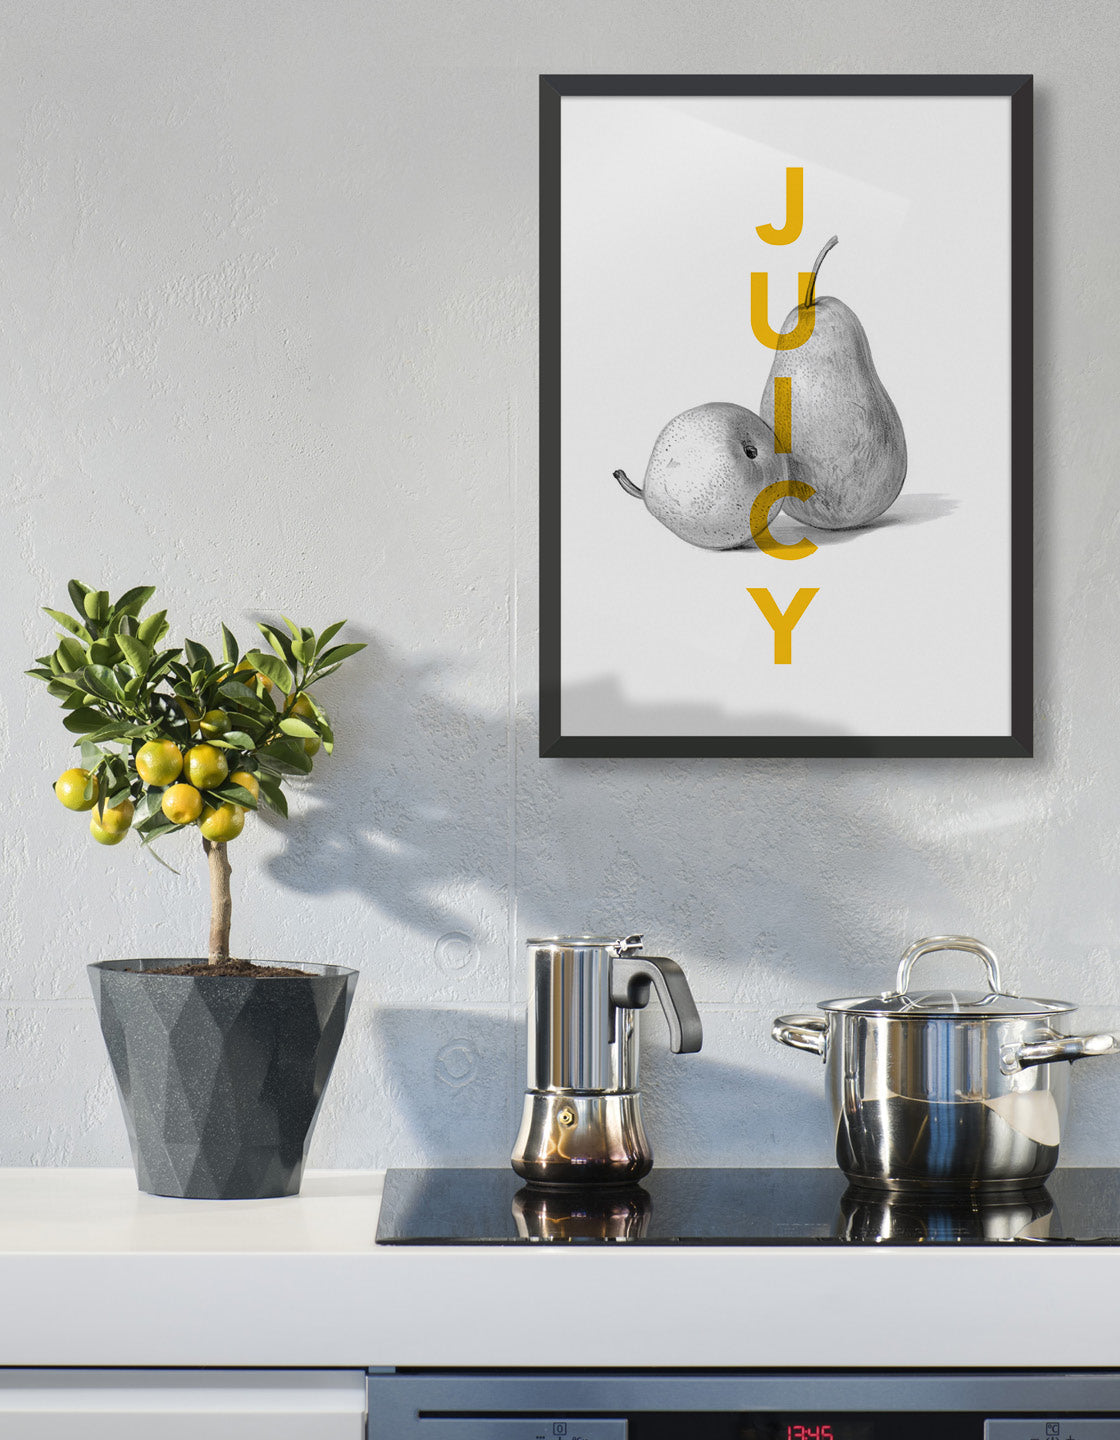 juicy pear typography print - yellow juicy text overlaid on a monochrome line drawing of pears